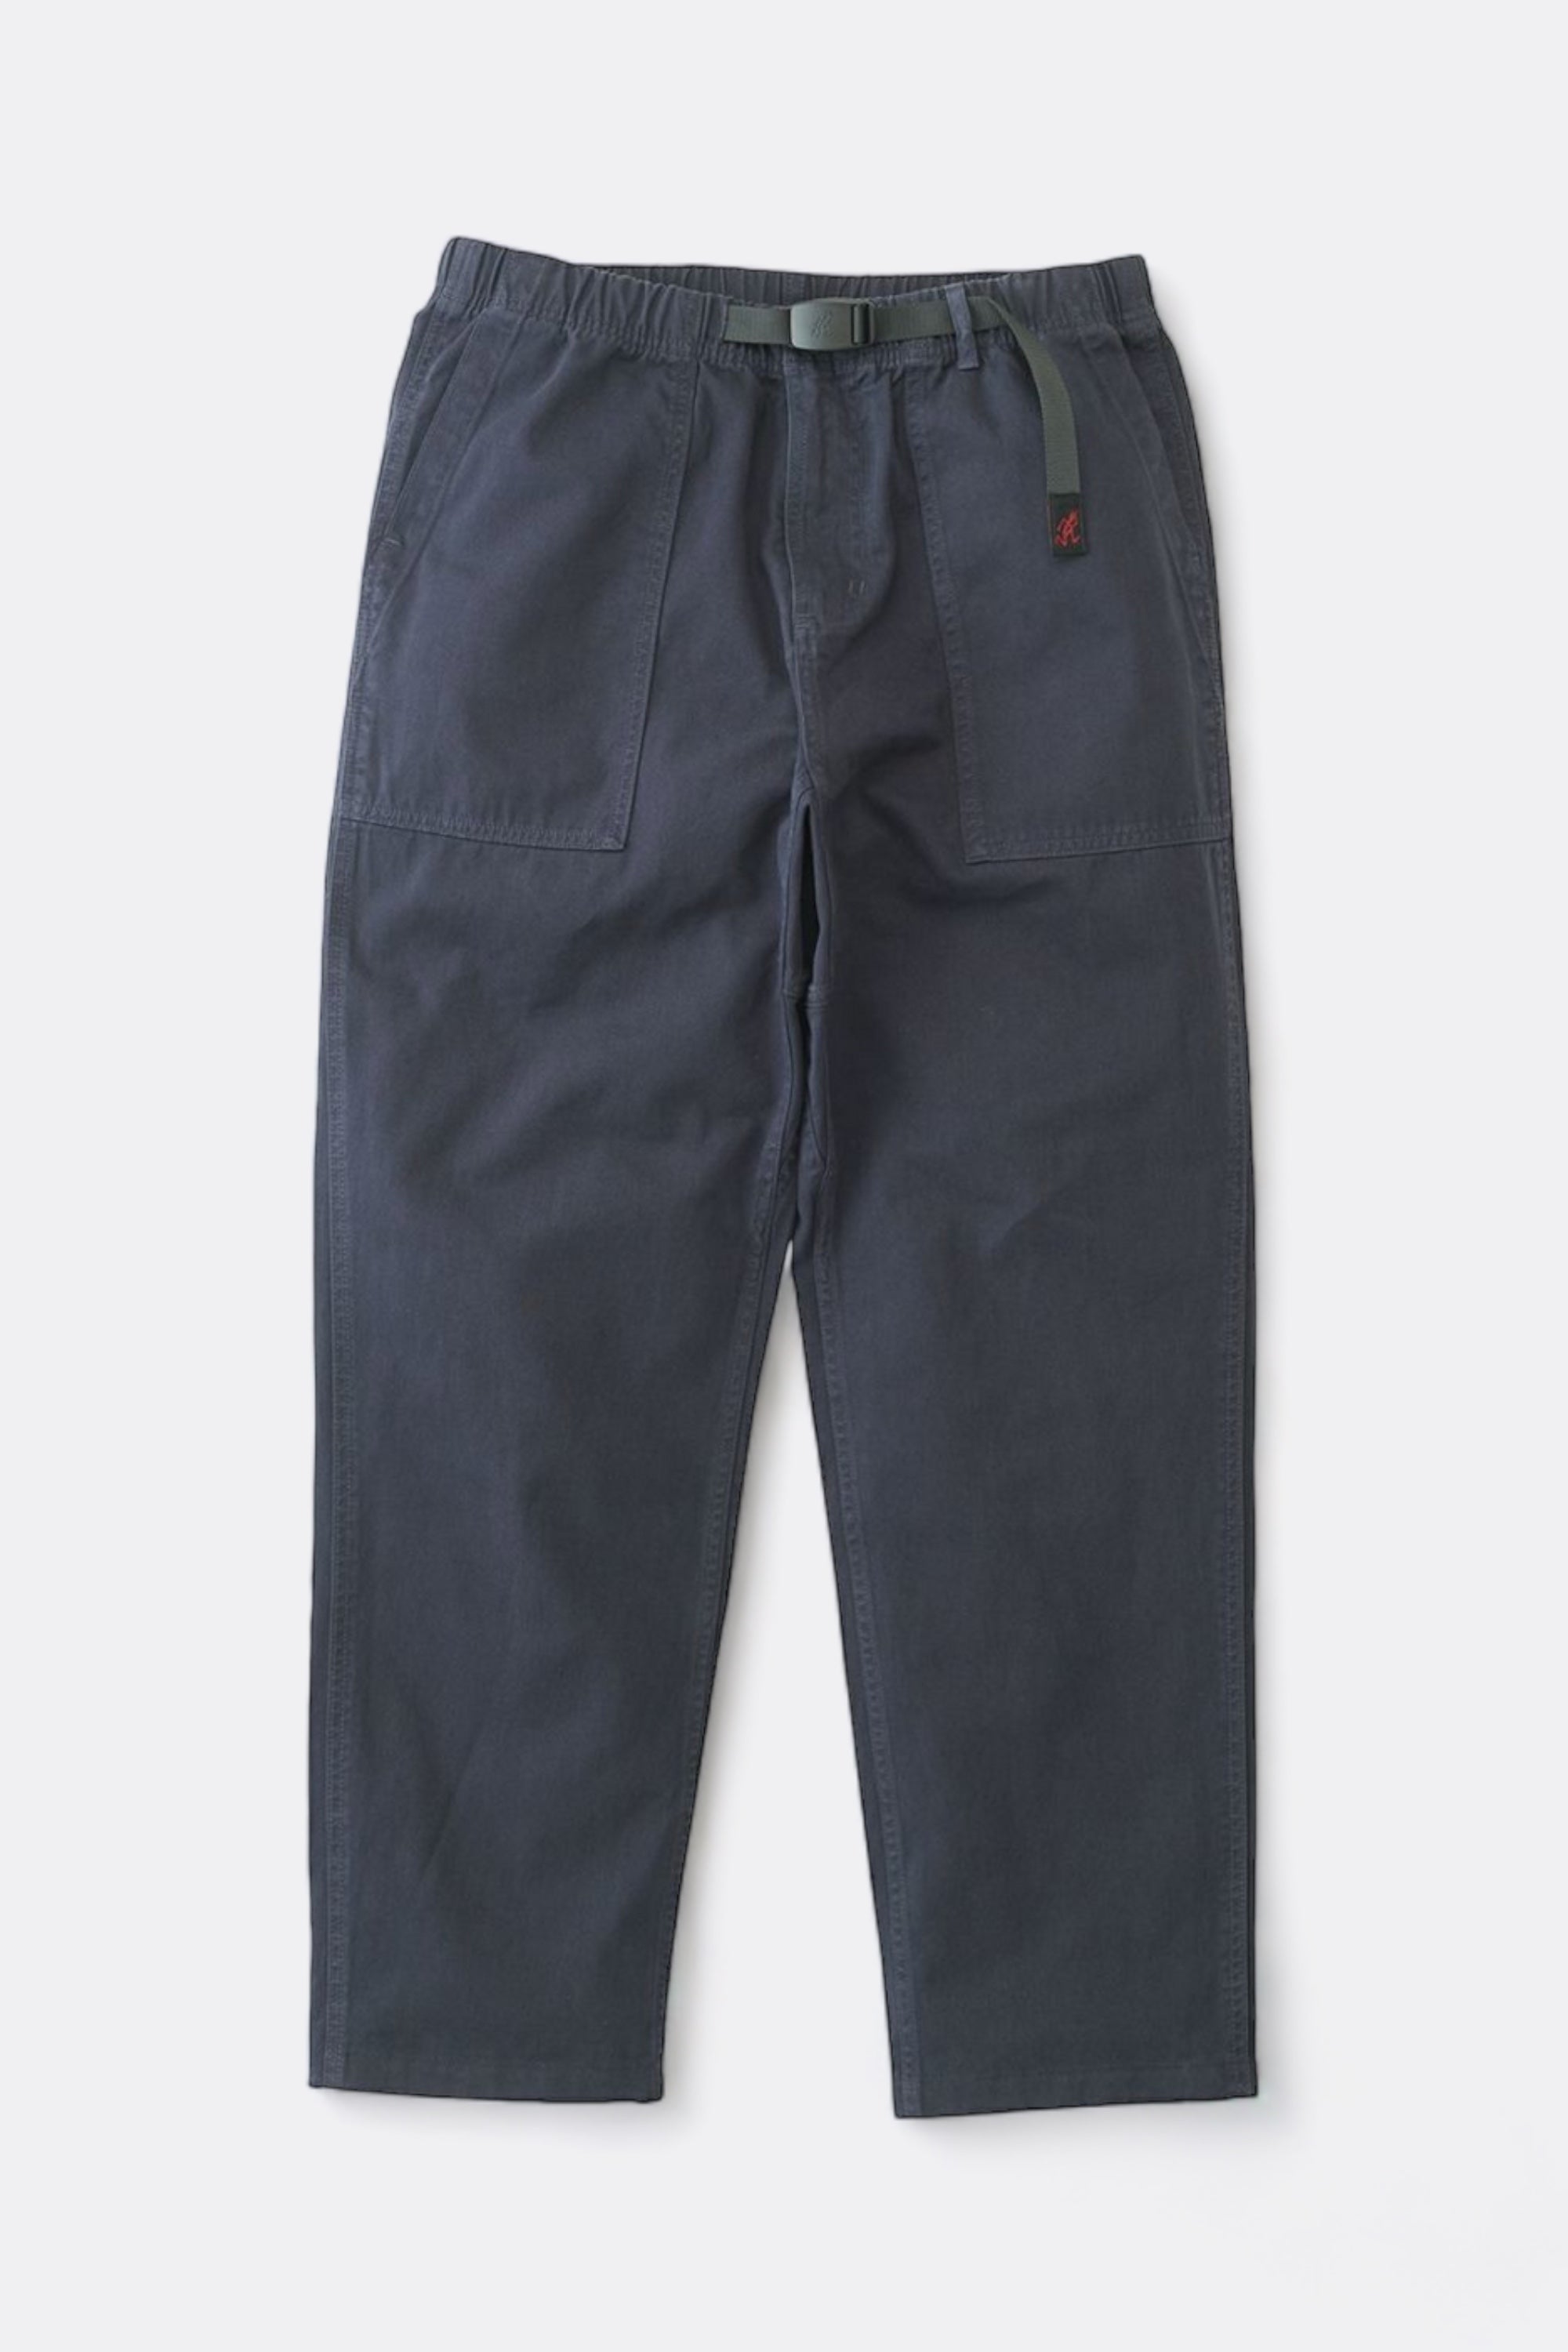 Gramicci - Loose Tapered Ridge Pant (Double Navy)